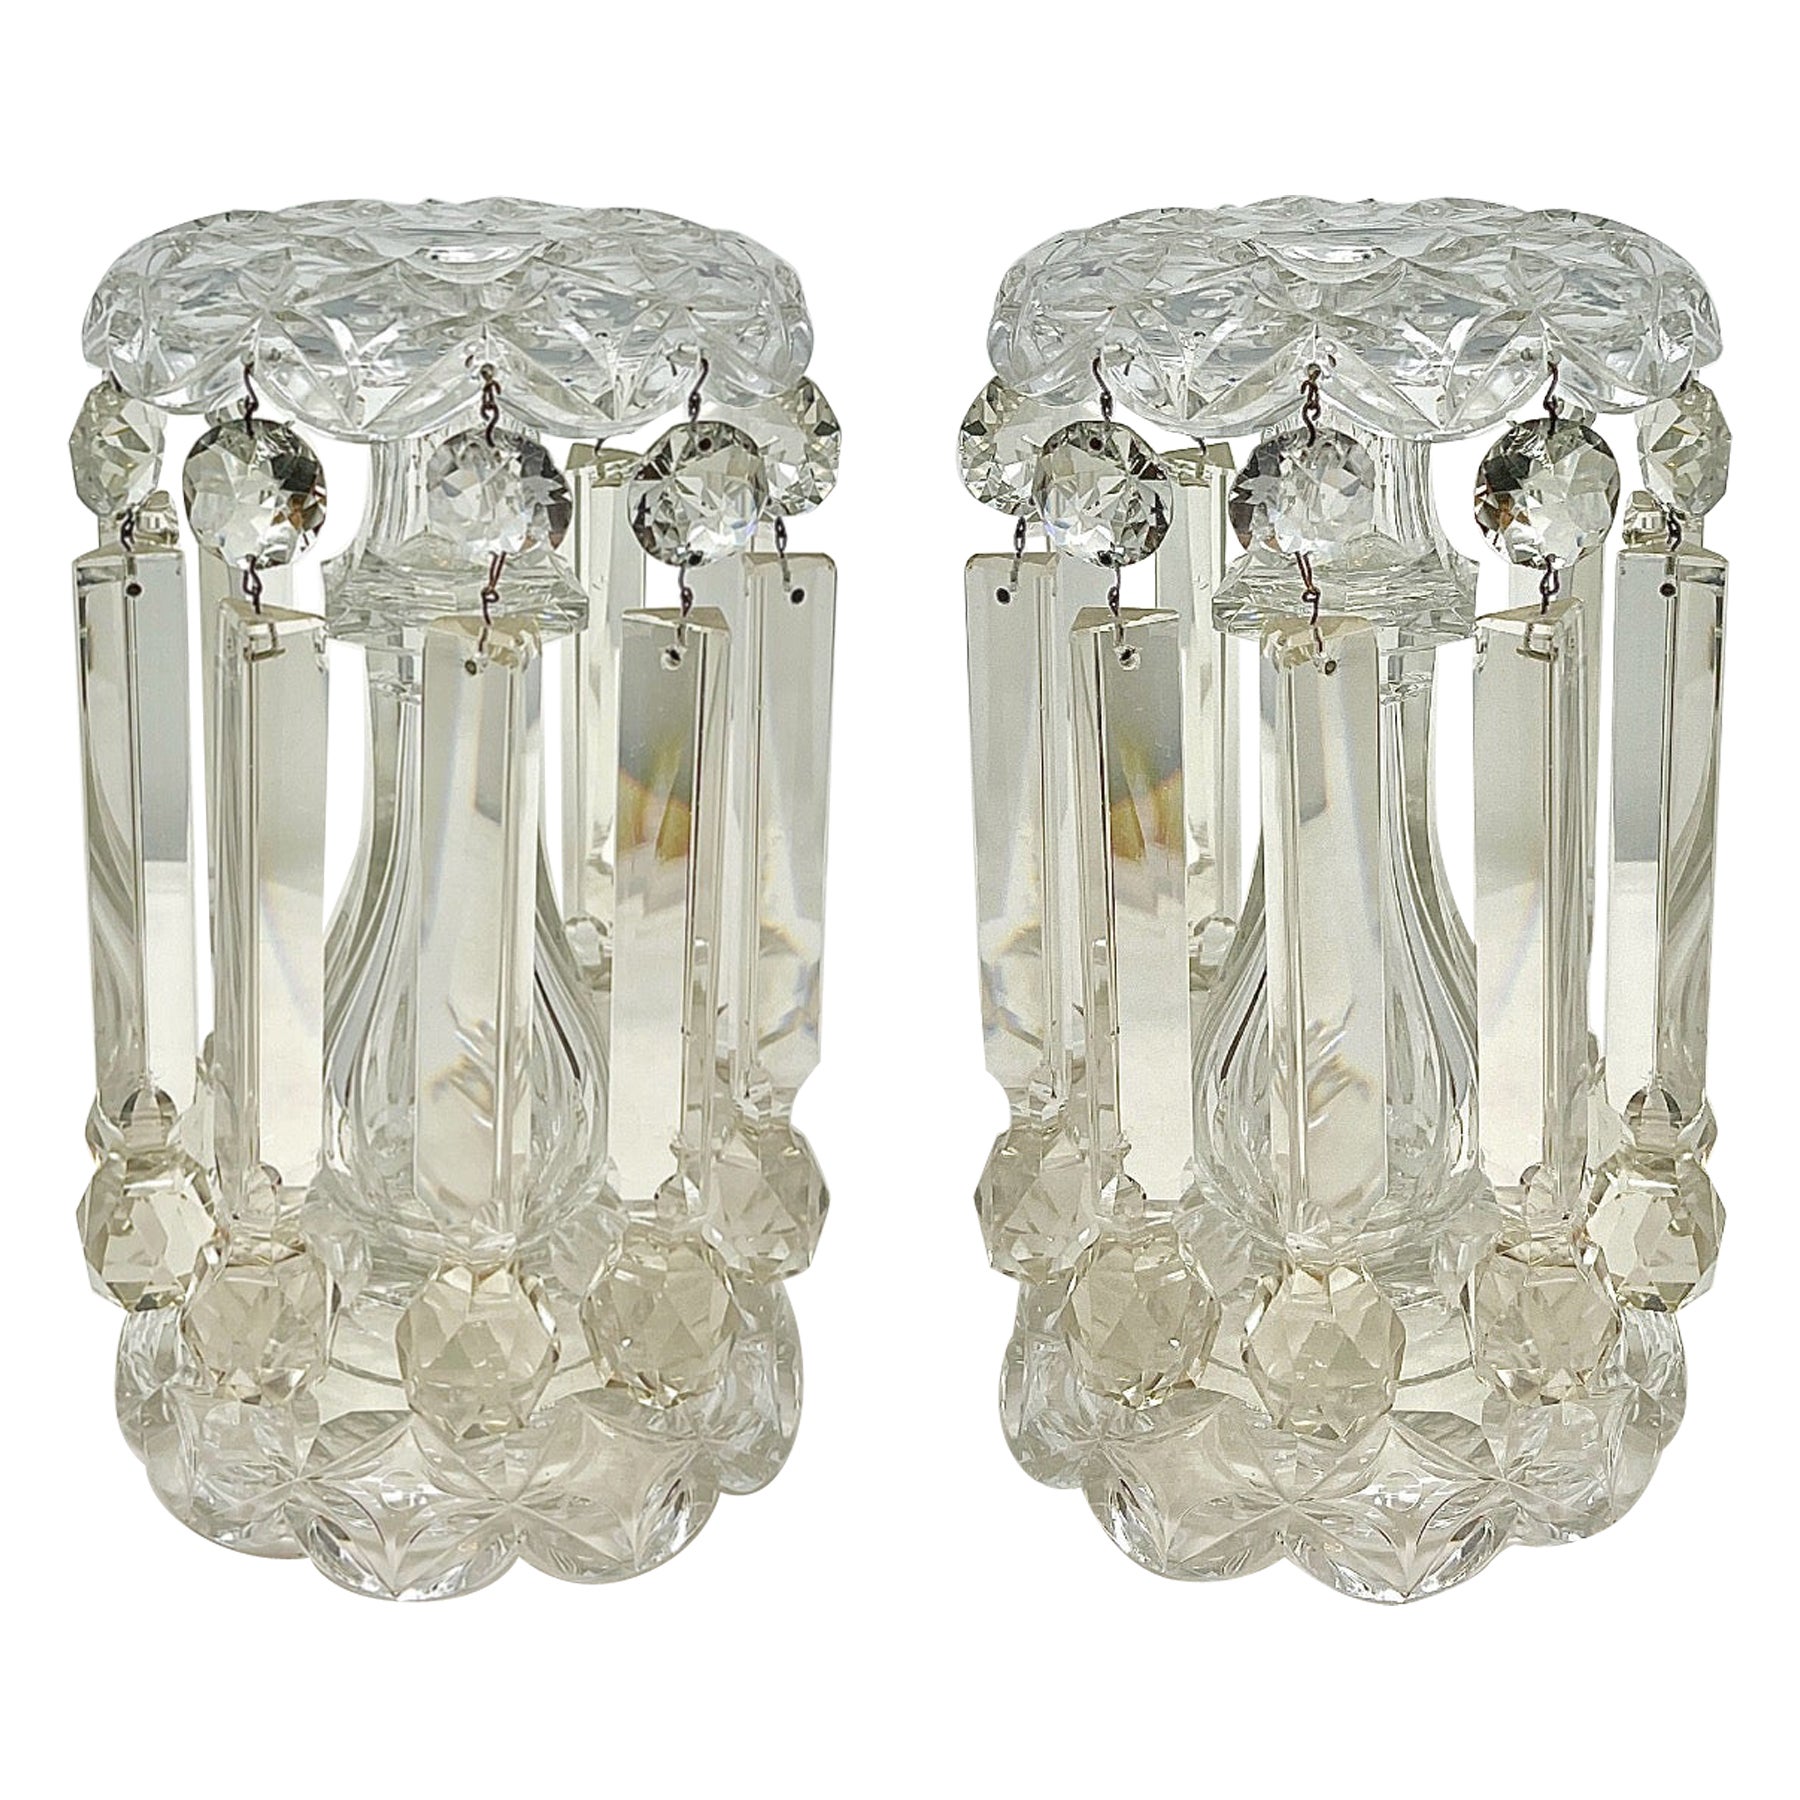 Pair Antique French Baccarat Cut Crystal Lusters or Candleholders, Circa 1860's.